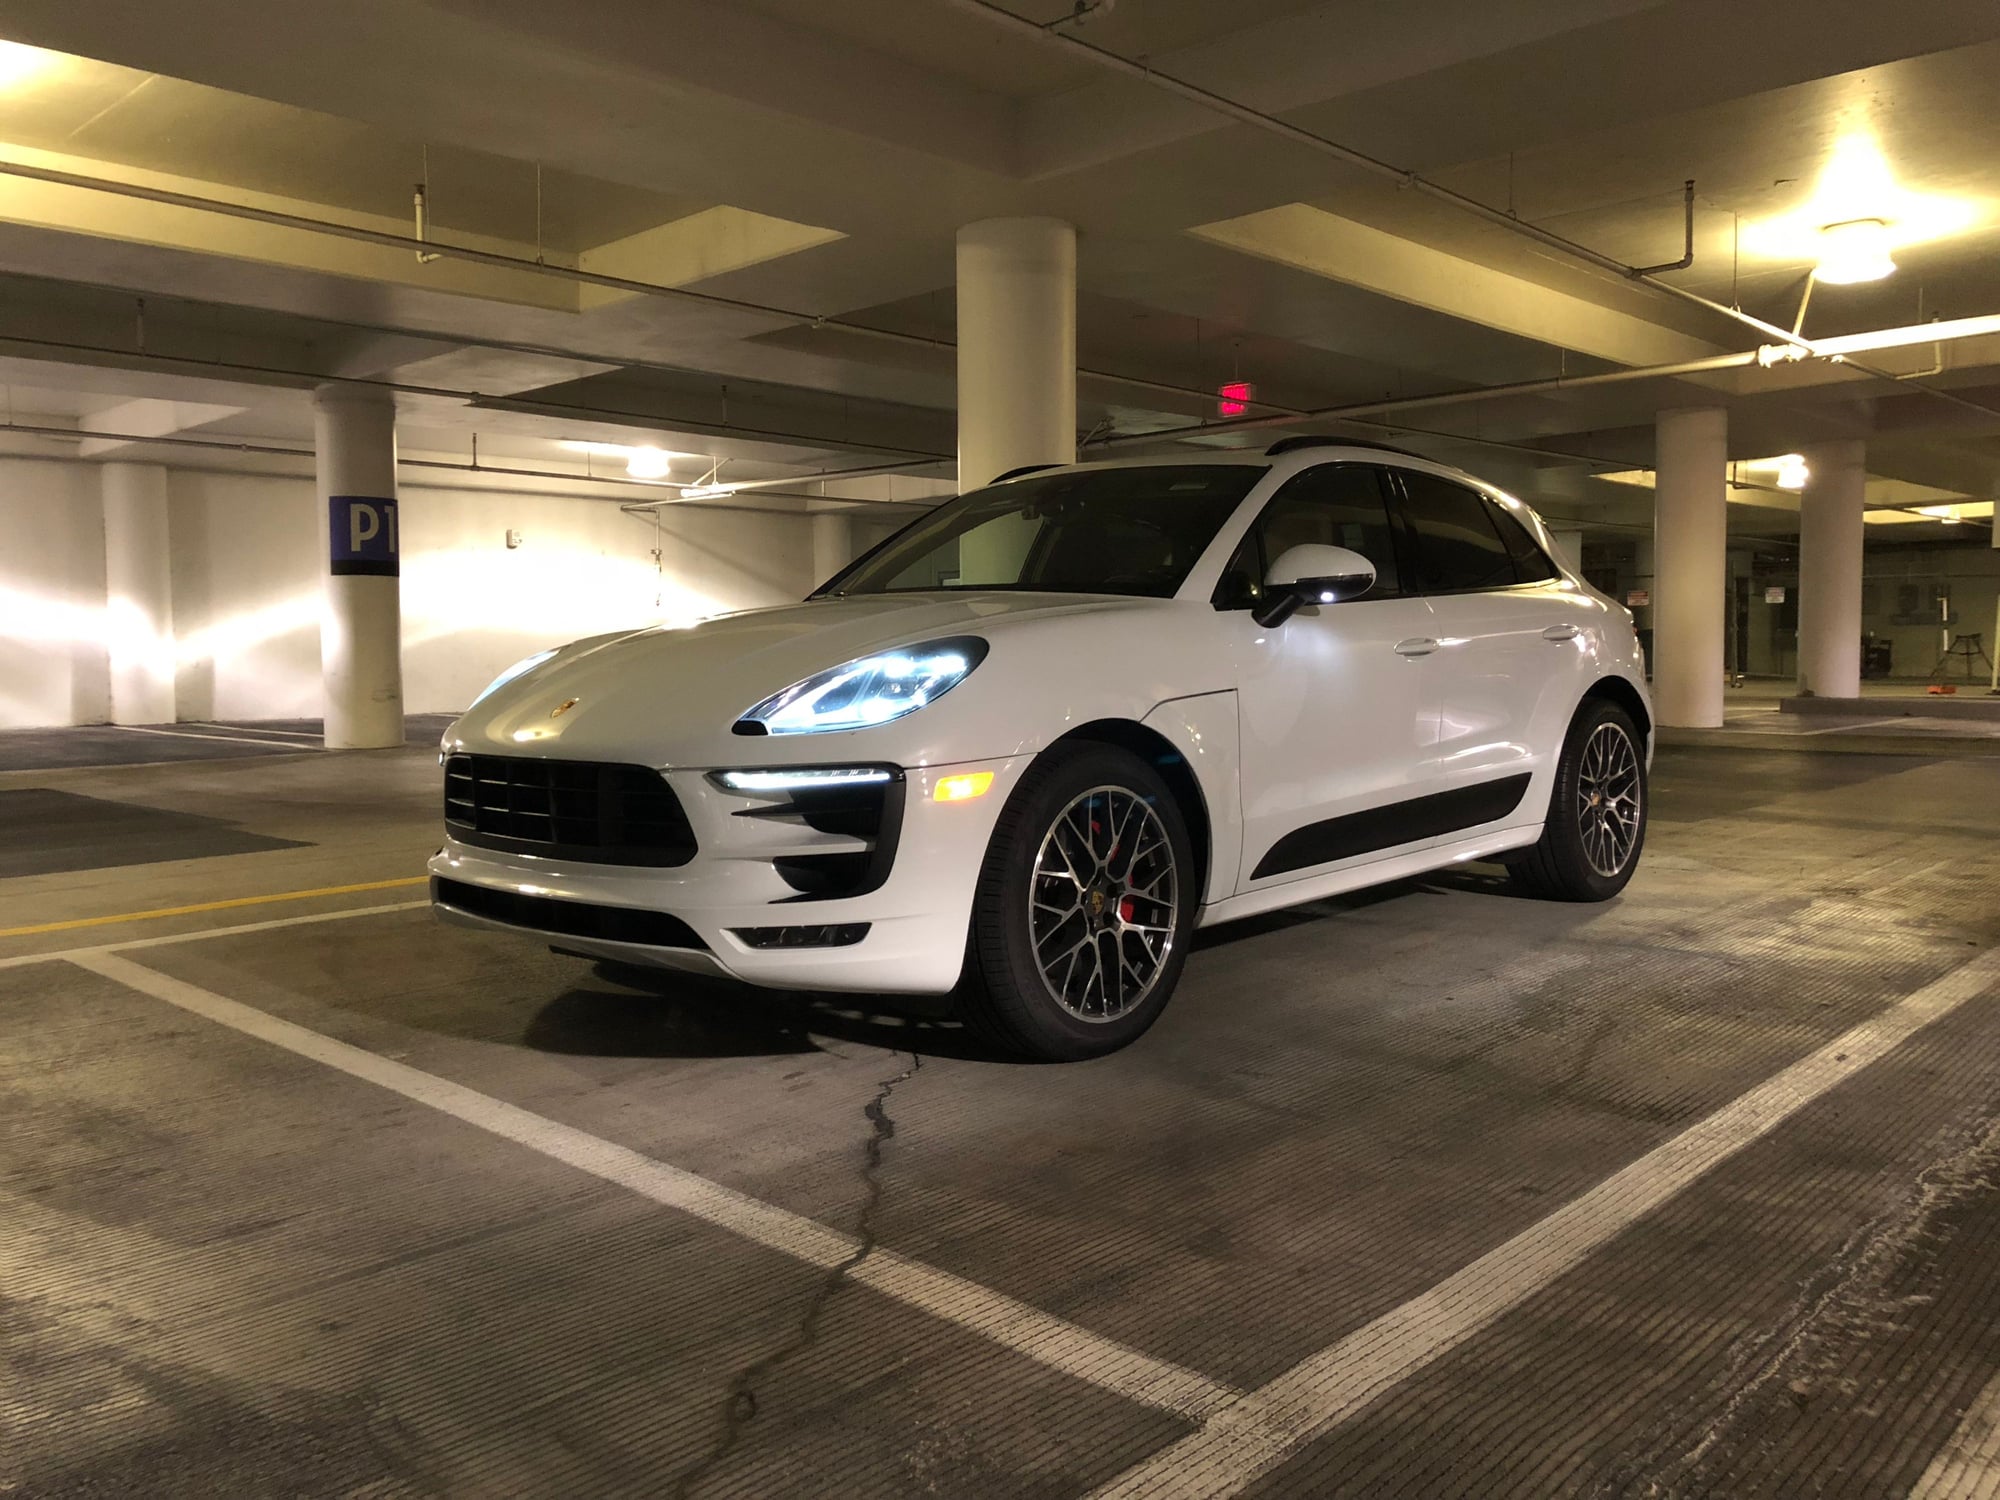 2017 Porsche Macan - Macan GTS - High spec - Used - VIN WP1AG2A5XHLB51196 - 26,500 Miles - 6 cyl - AWD - Automatic - SUV - White - Portland, OR 97239, United States